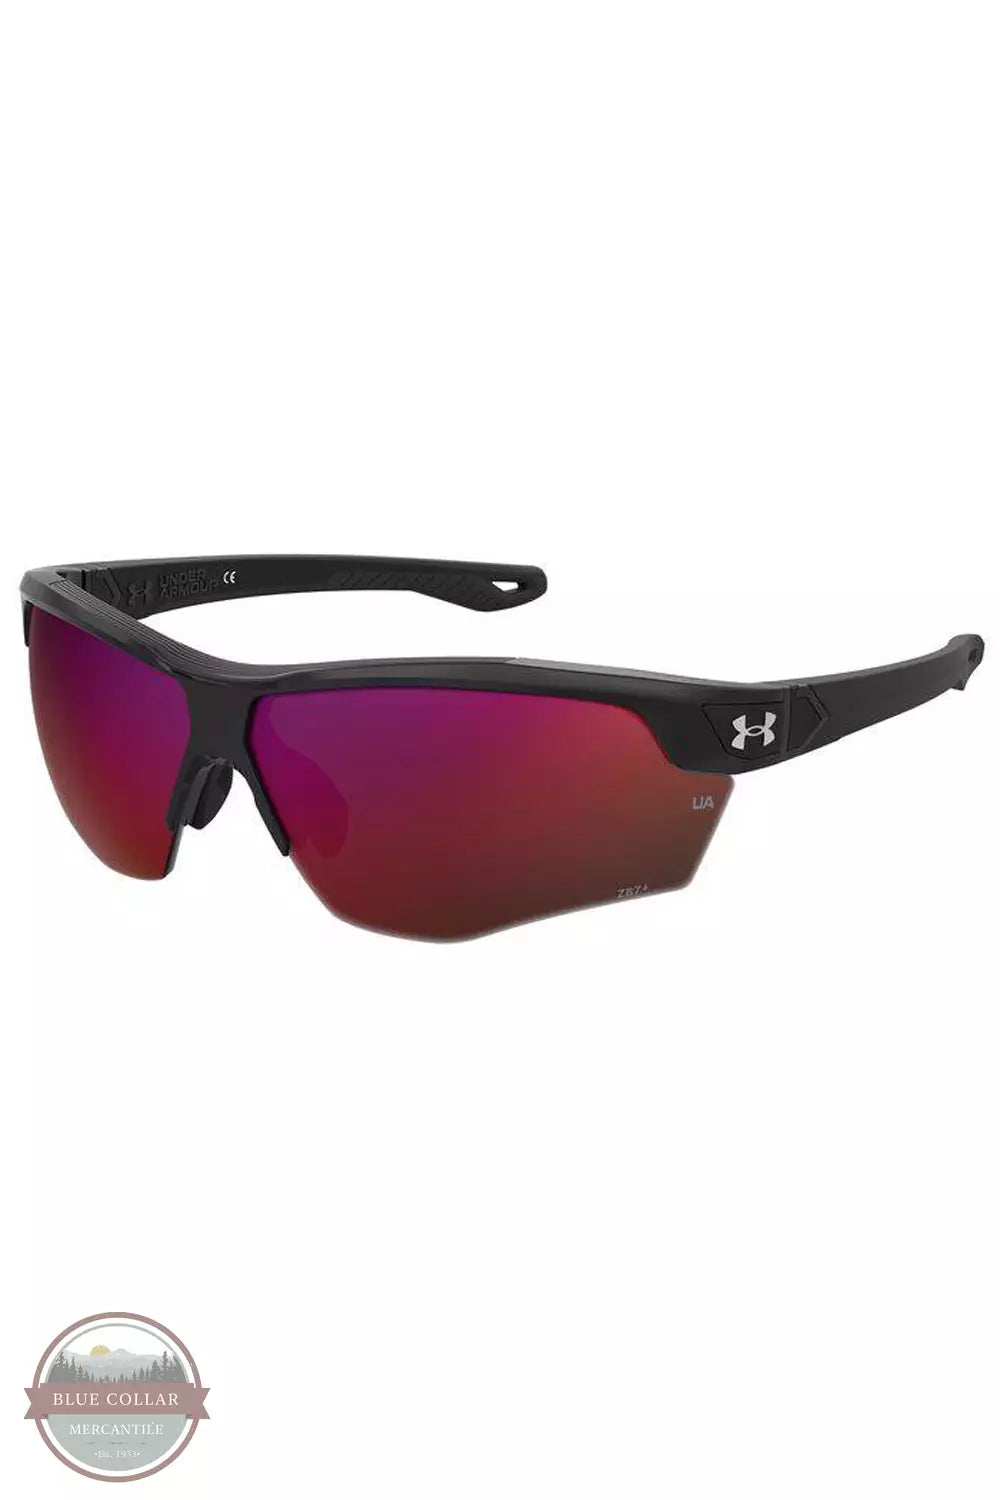 Under Armour 1381107-002 Yard Dual TUNED Baseball Sunglasses in Black / Infrared Profile View